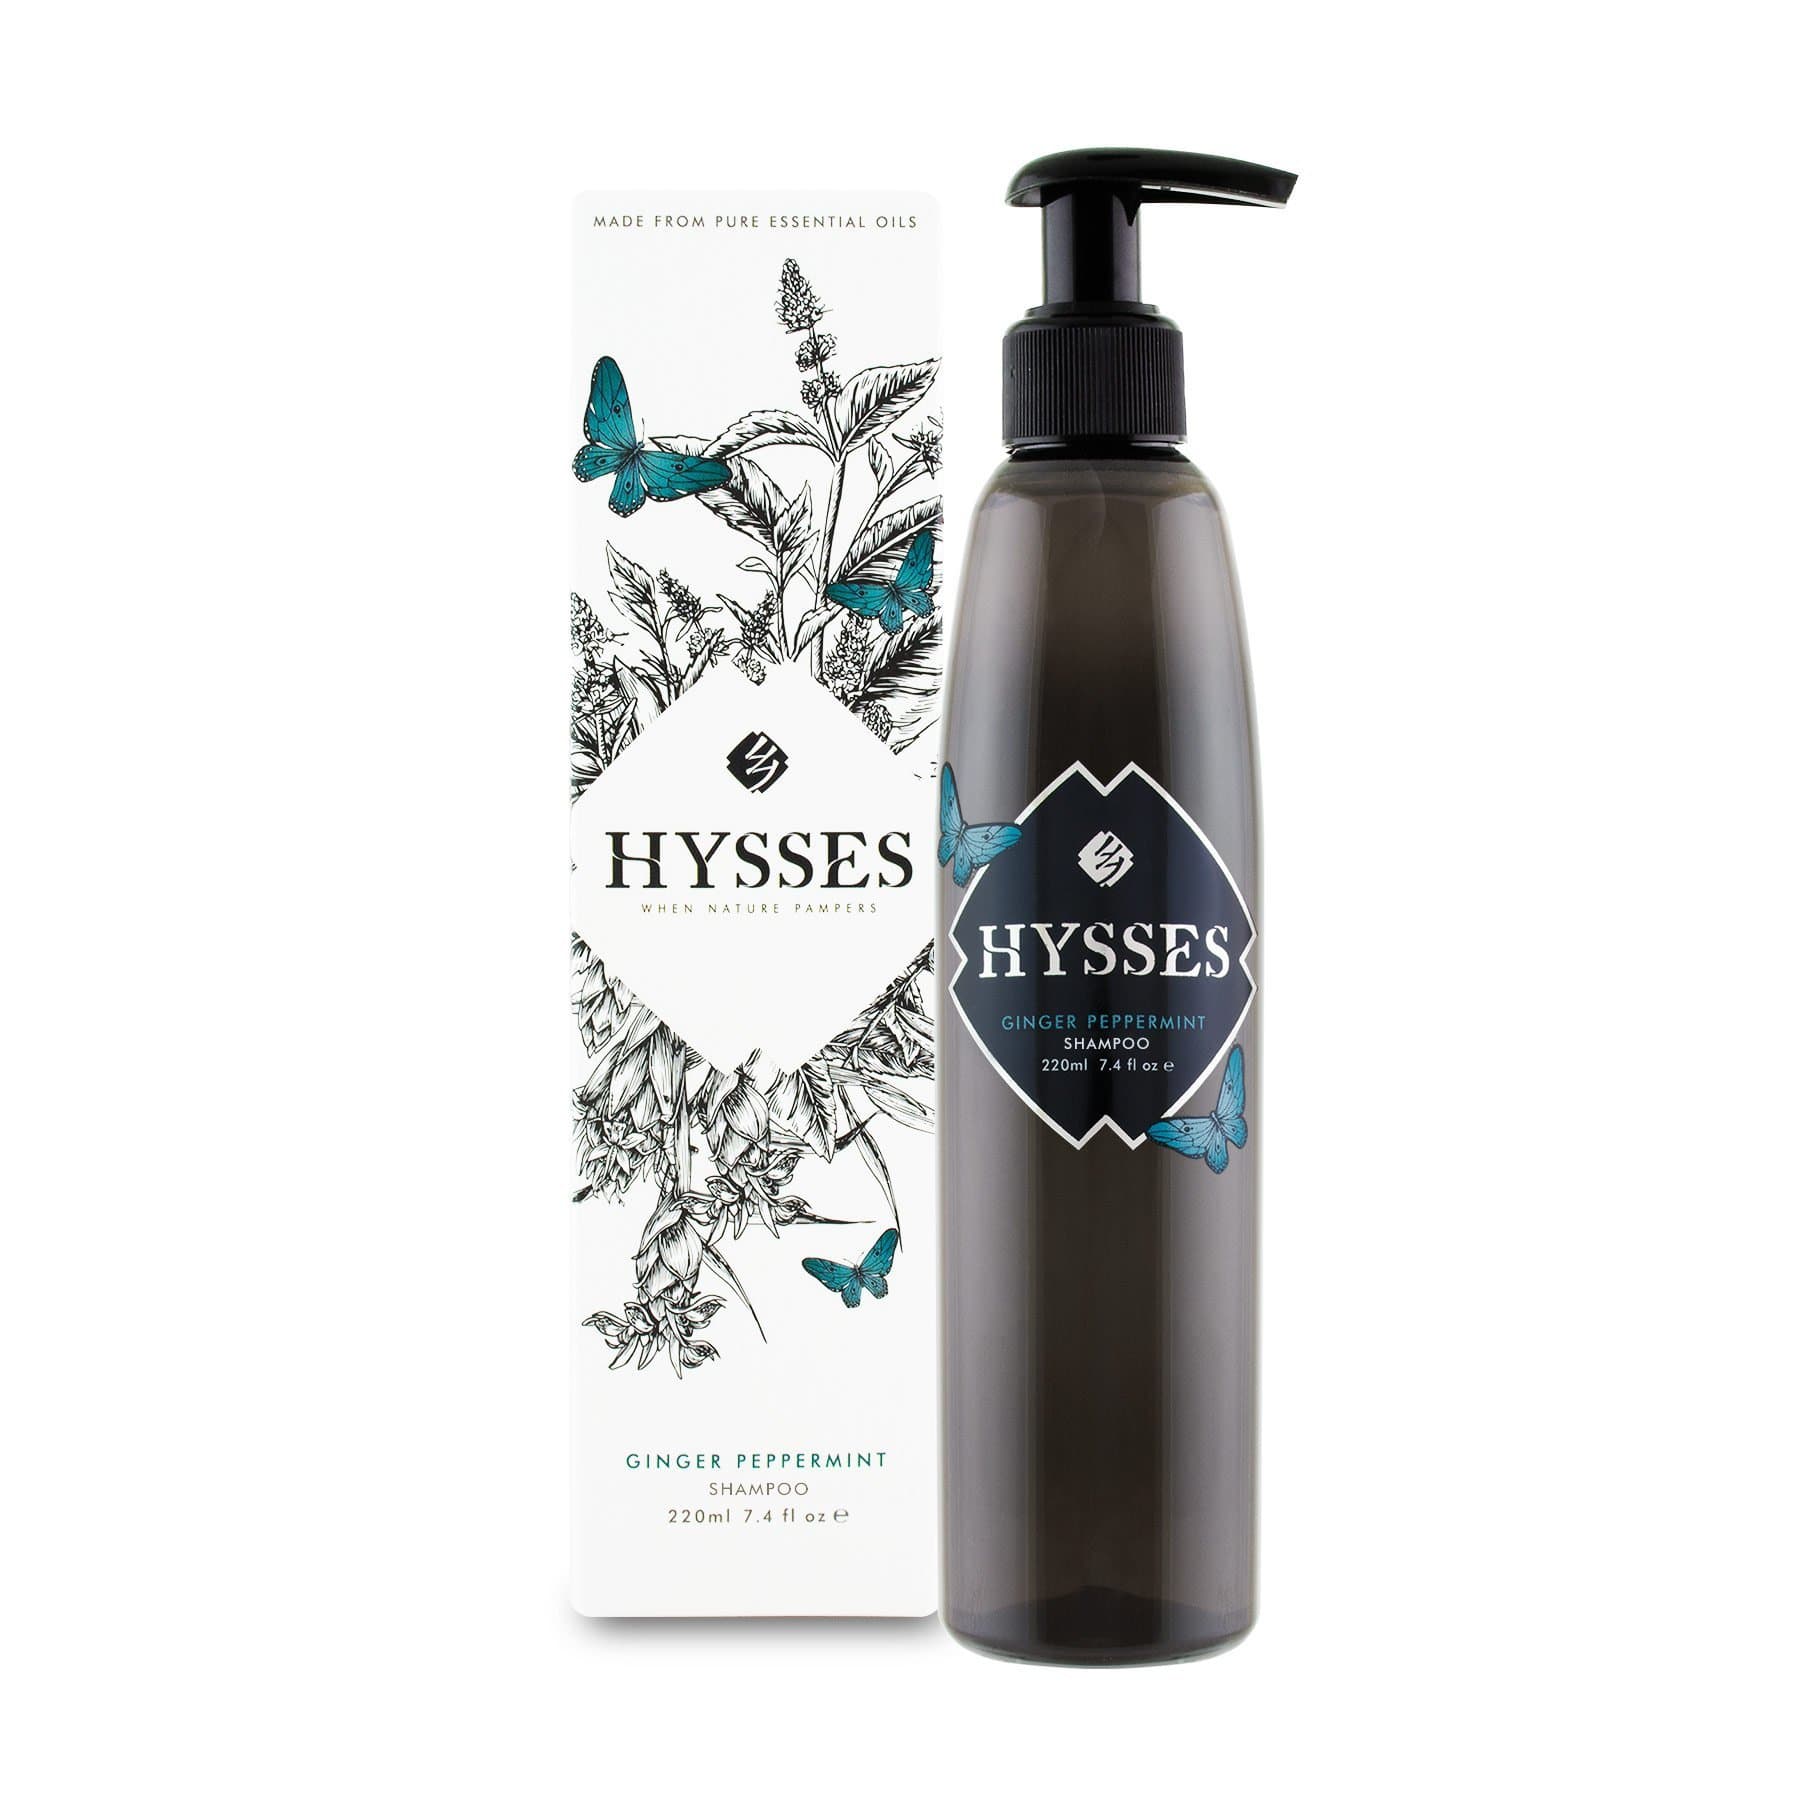 Hysses Hair Care Shampoo Ginger Peppermint